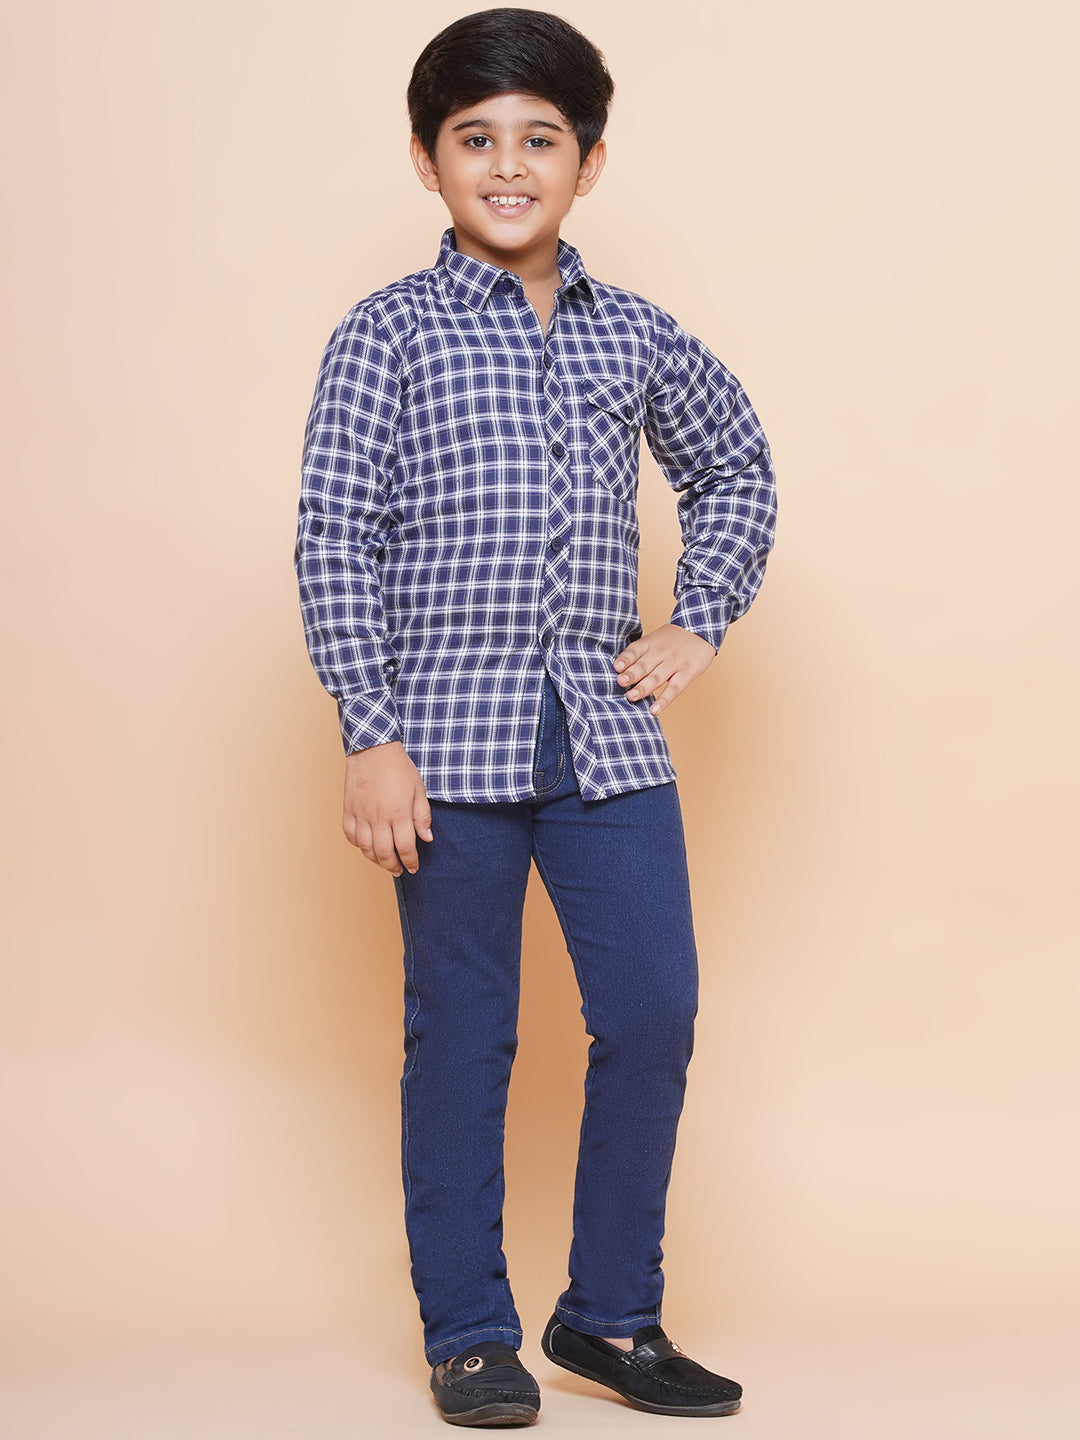 Boys Purple Regular Fit Shirt and Jeans Clothing Set